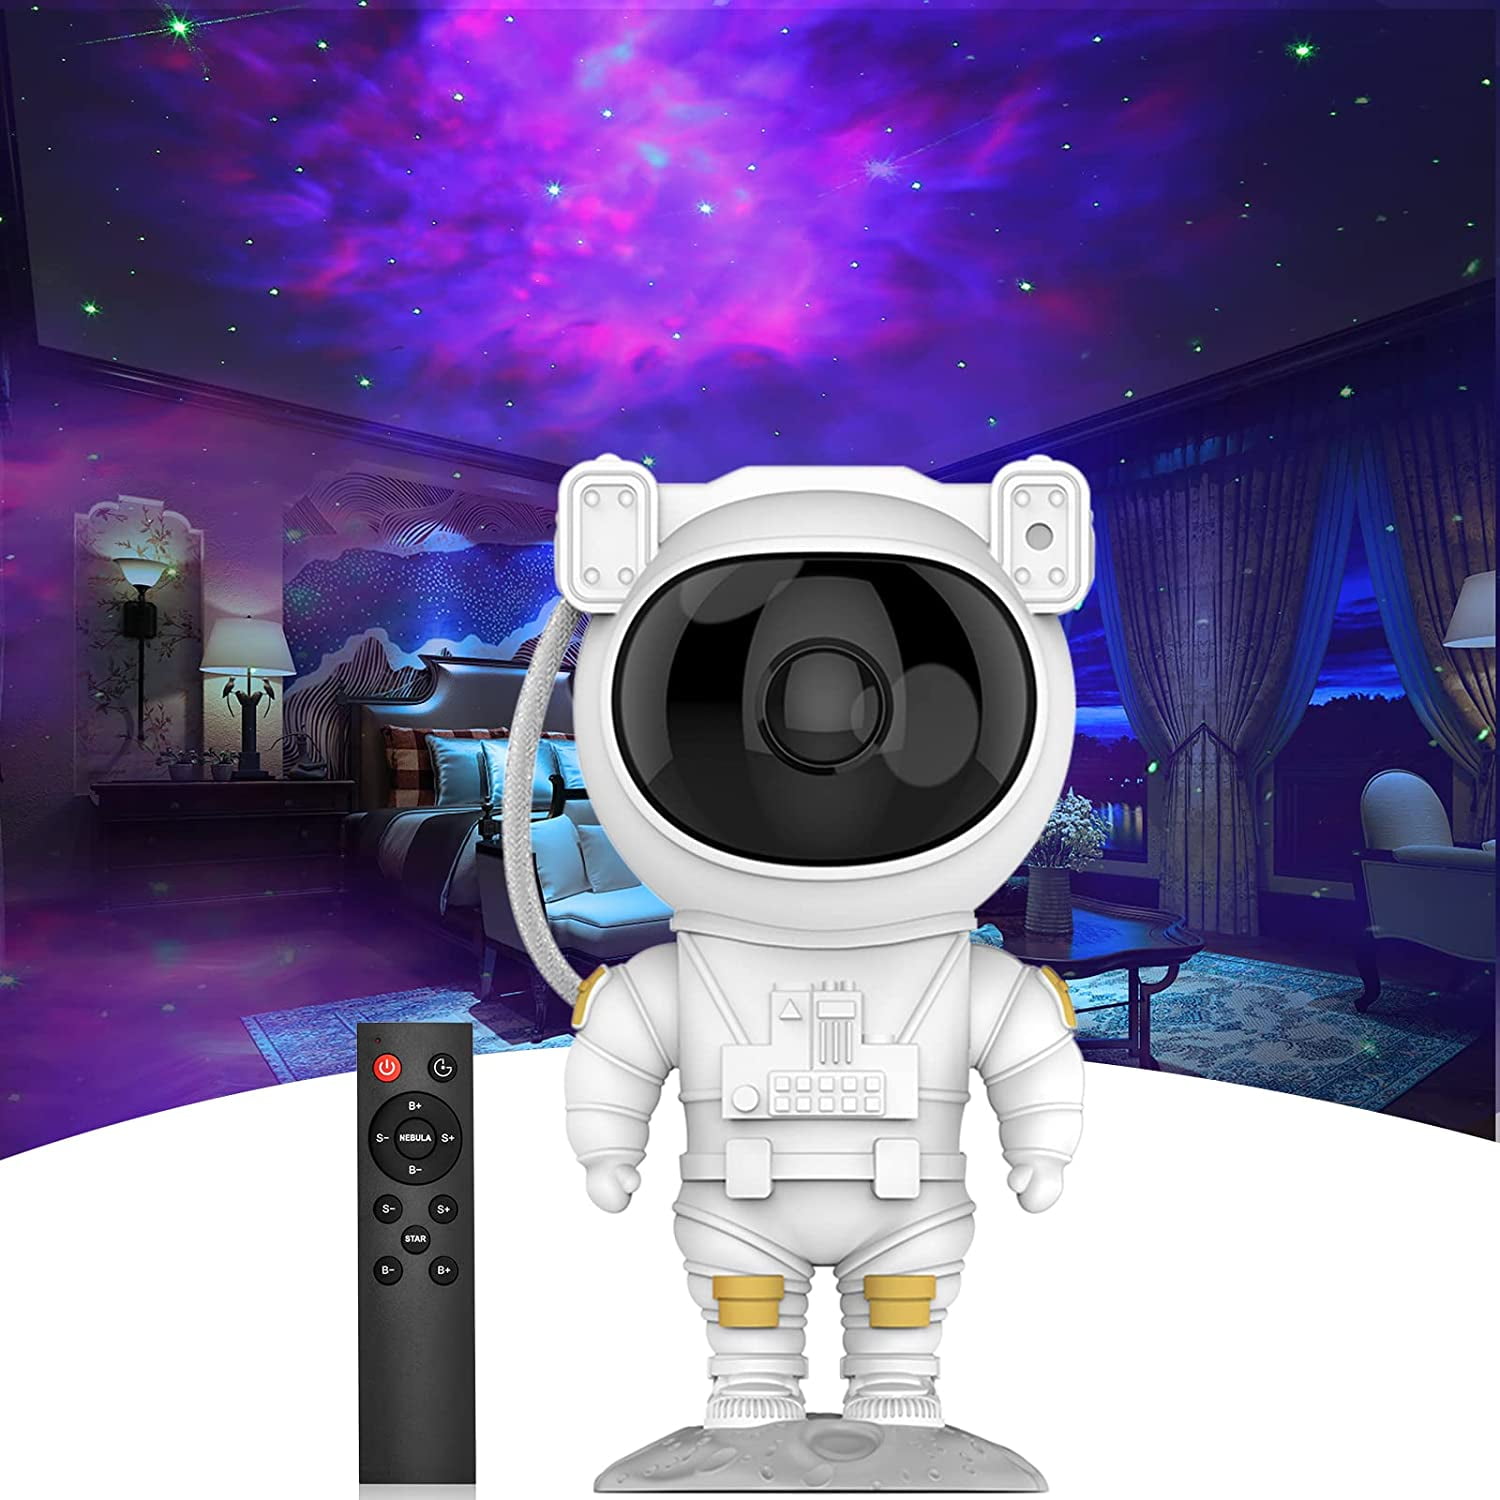 Astronaut Galaxy Projector Great Birthday Christmas Gift for Kids Adults Starlight Starry Night Sky Projector for Room Decor Star Projector Night Light for Bedroom with Remote Control and Timer 